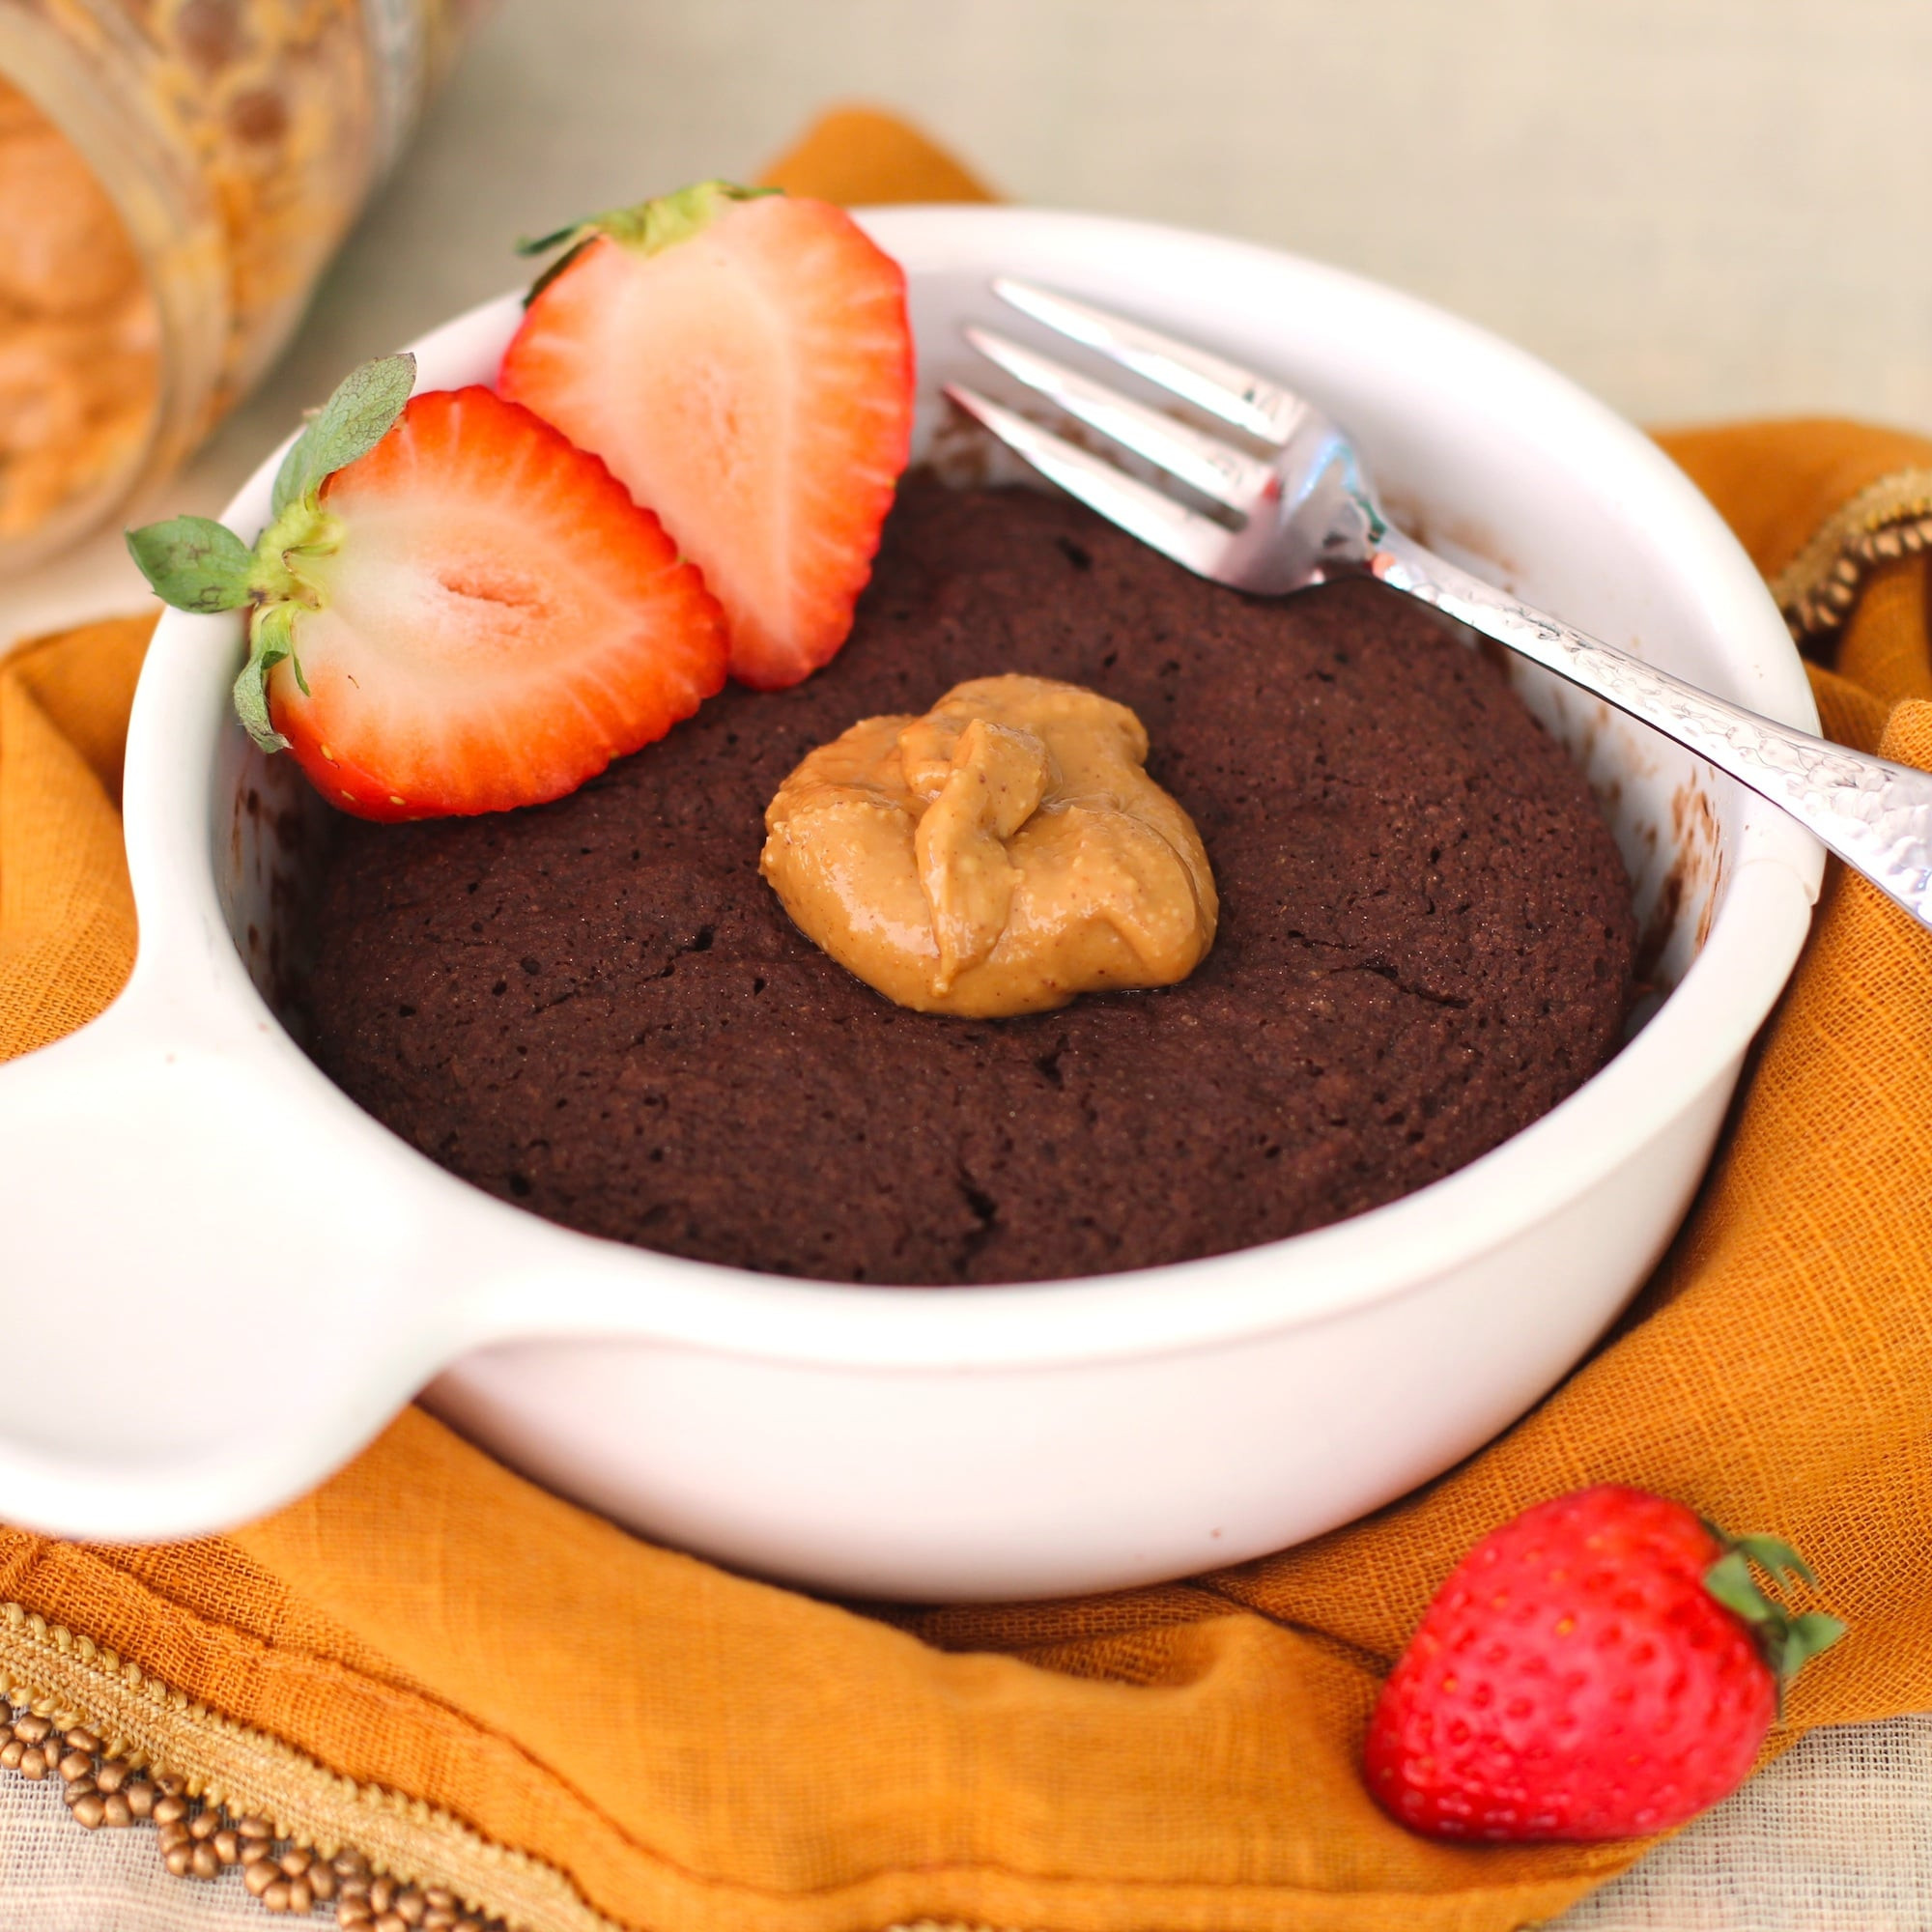 Healthy Single Serving Desserts
 Desserts With Benefits Healthy Single Serving Chocolate